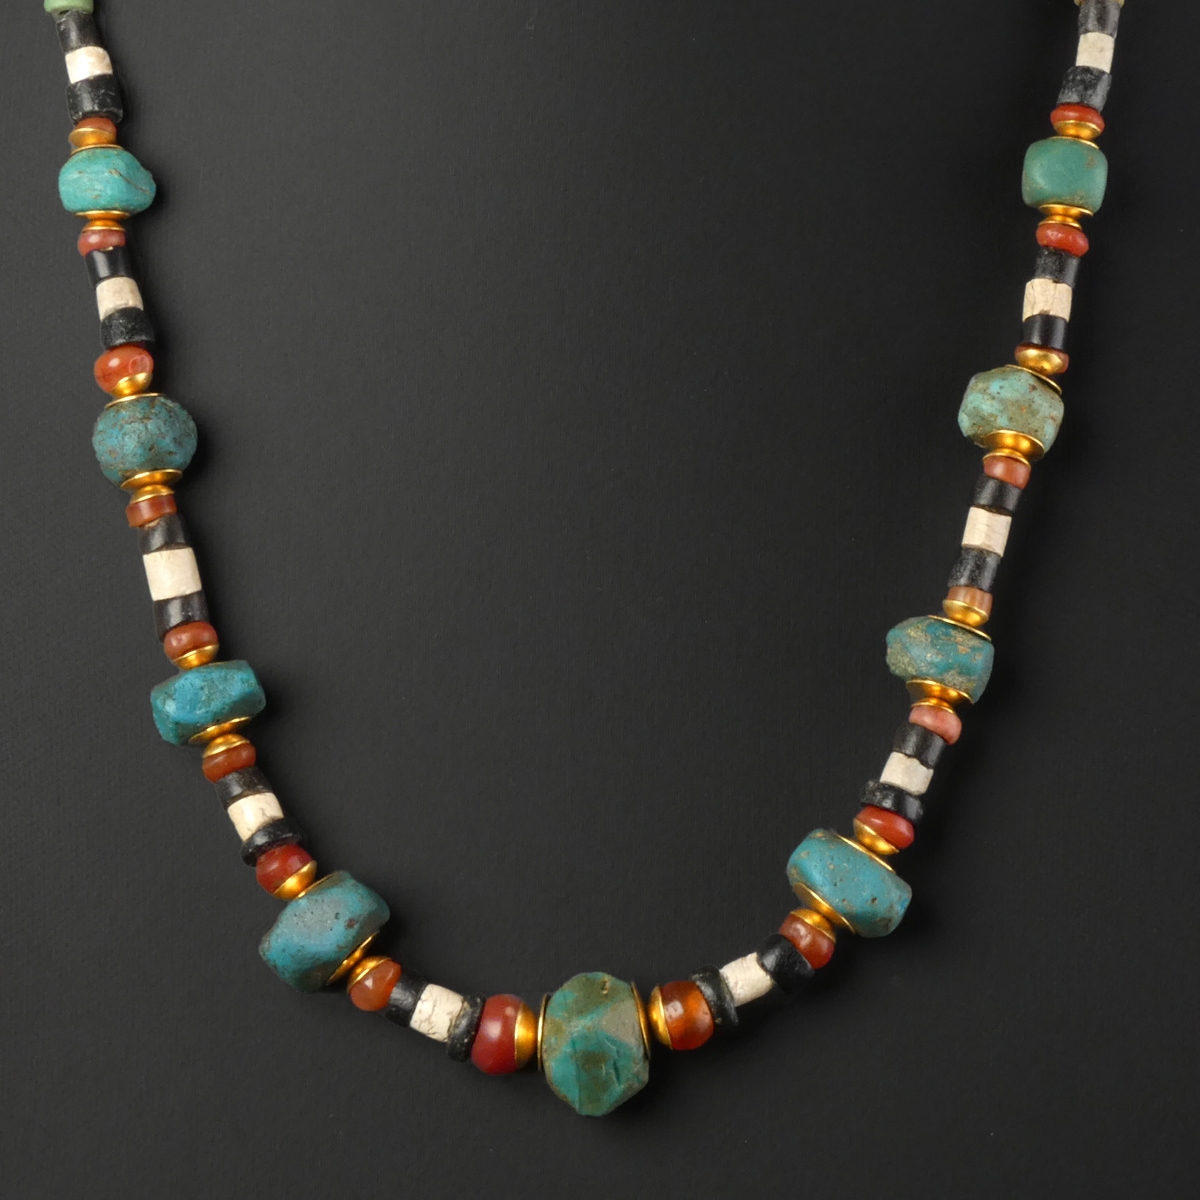 Necklace with Egyptian stone, glass and gold beads